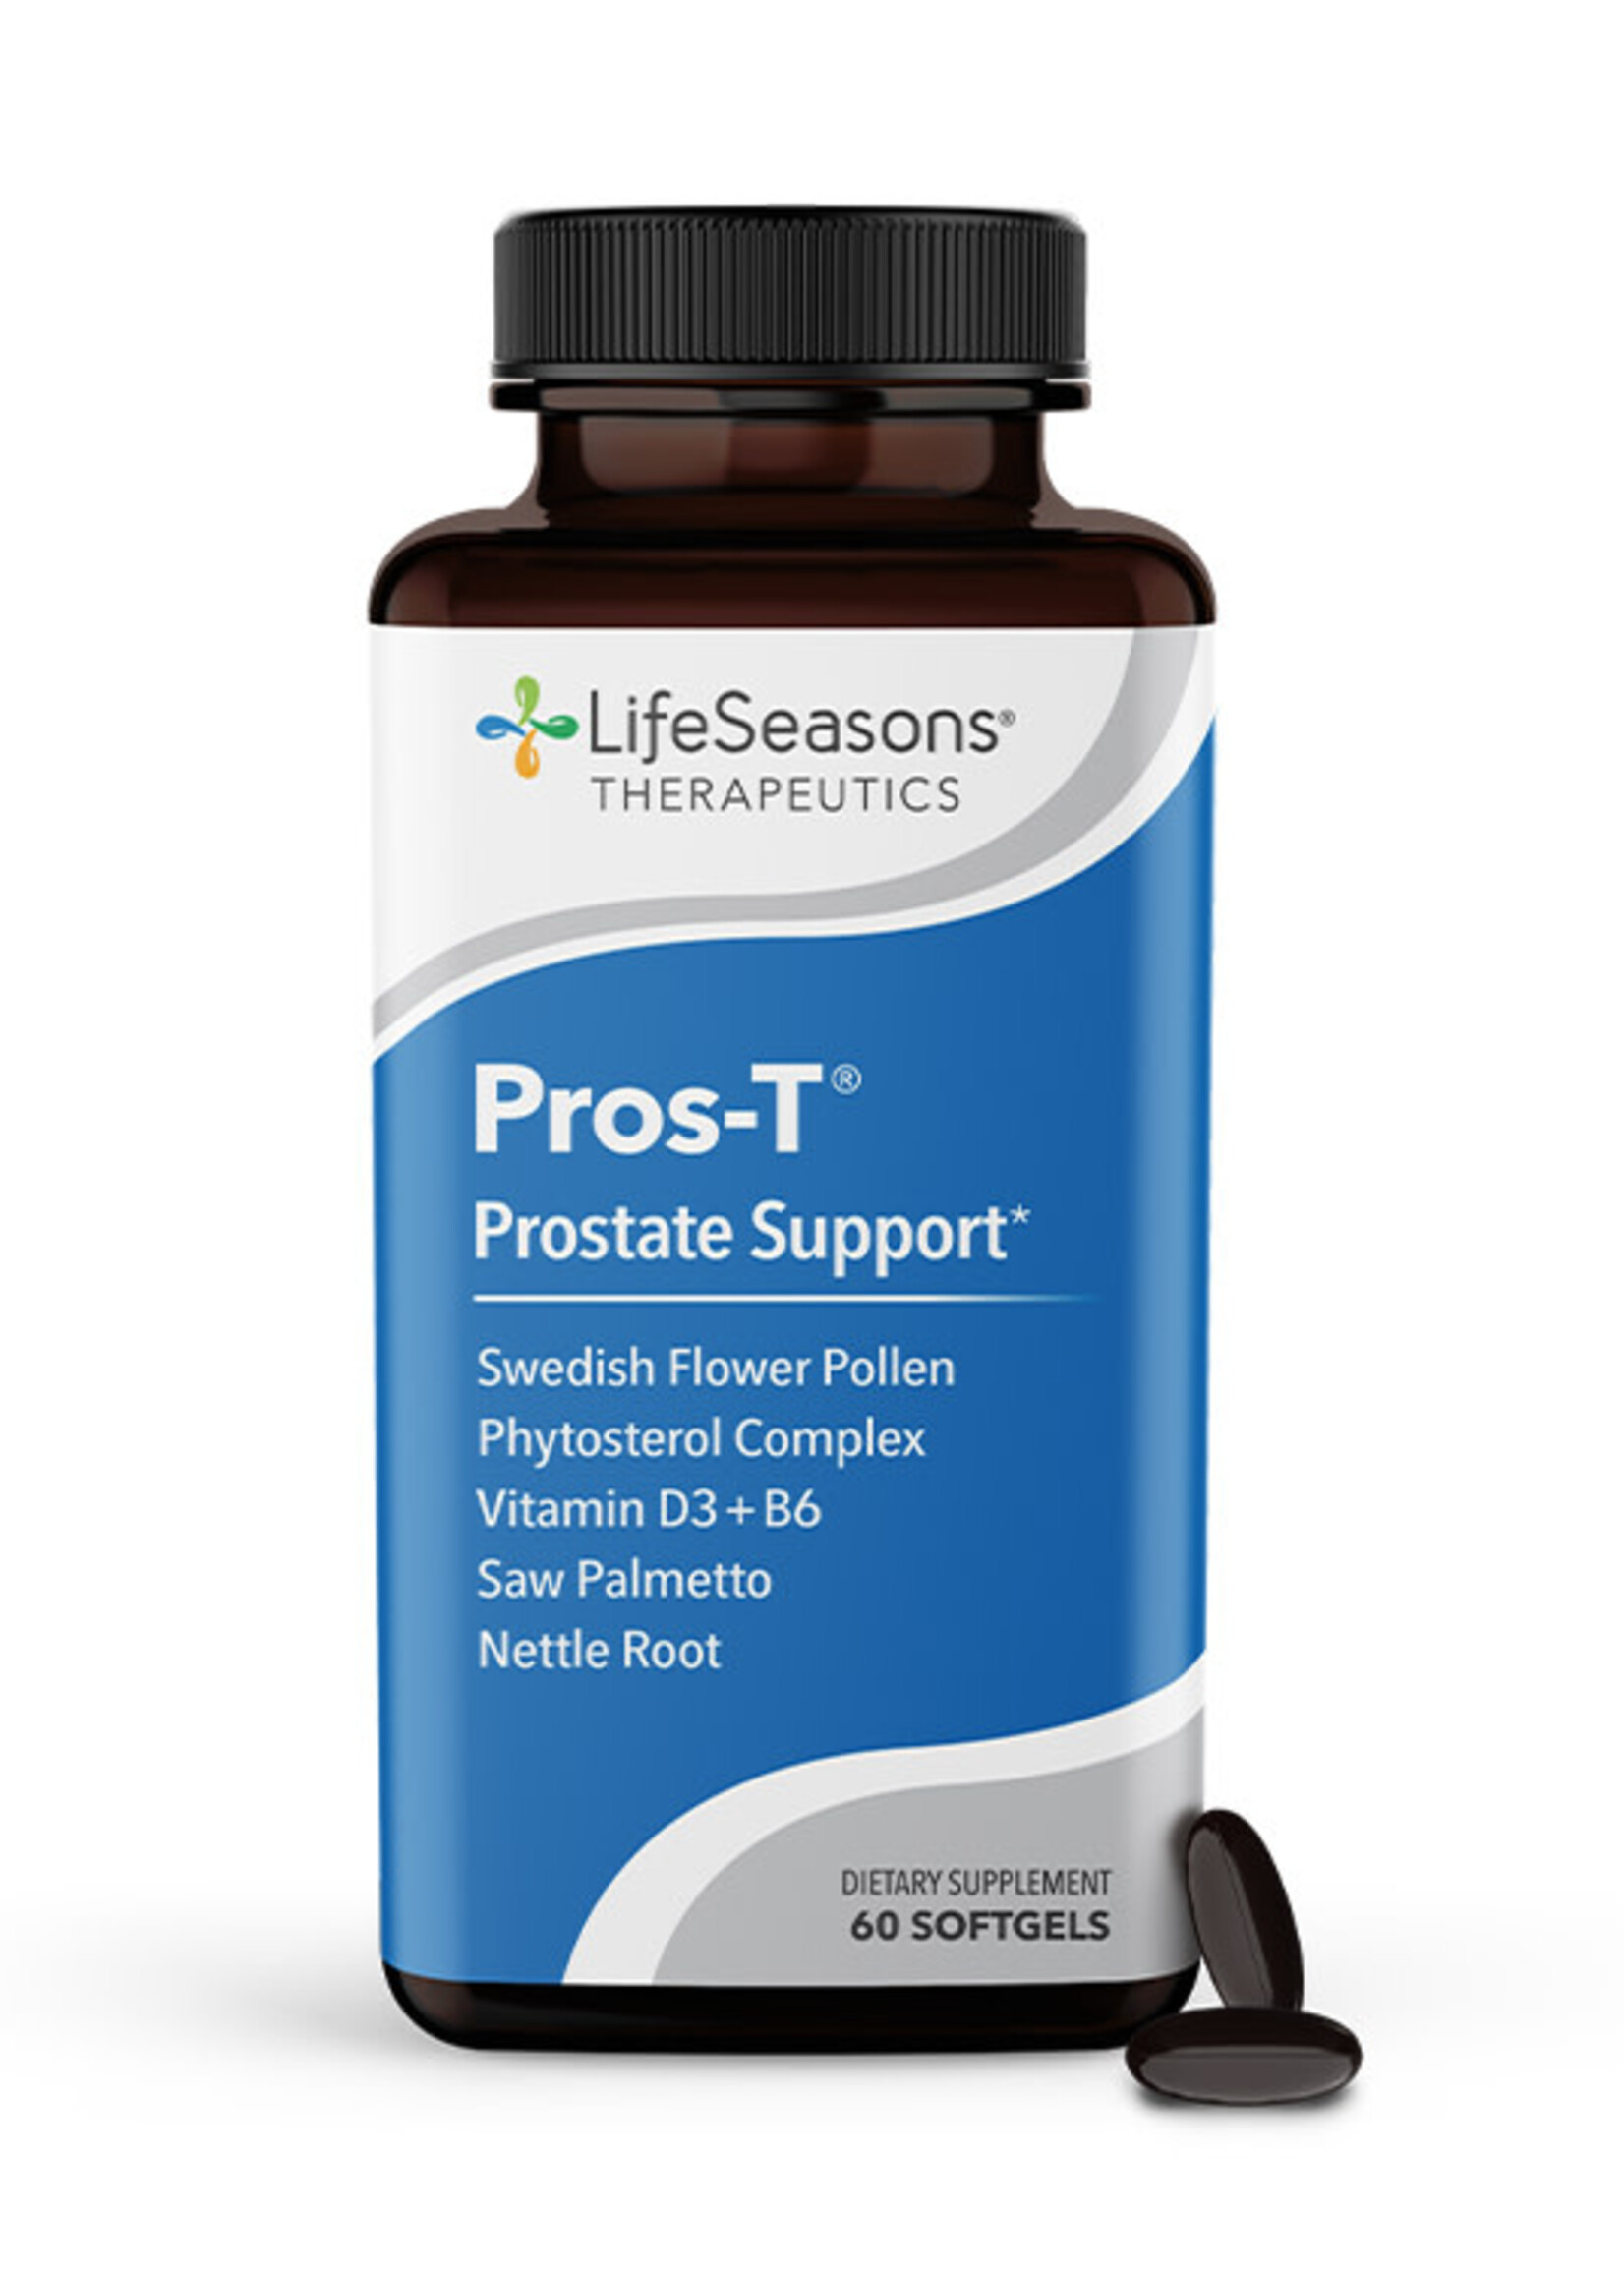 Life Seasons Pros-T Prostate Support